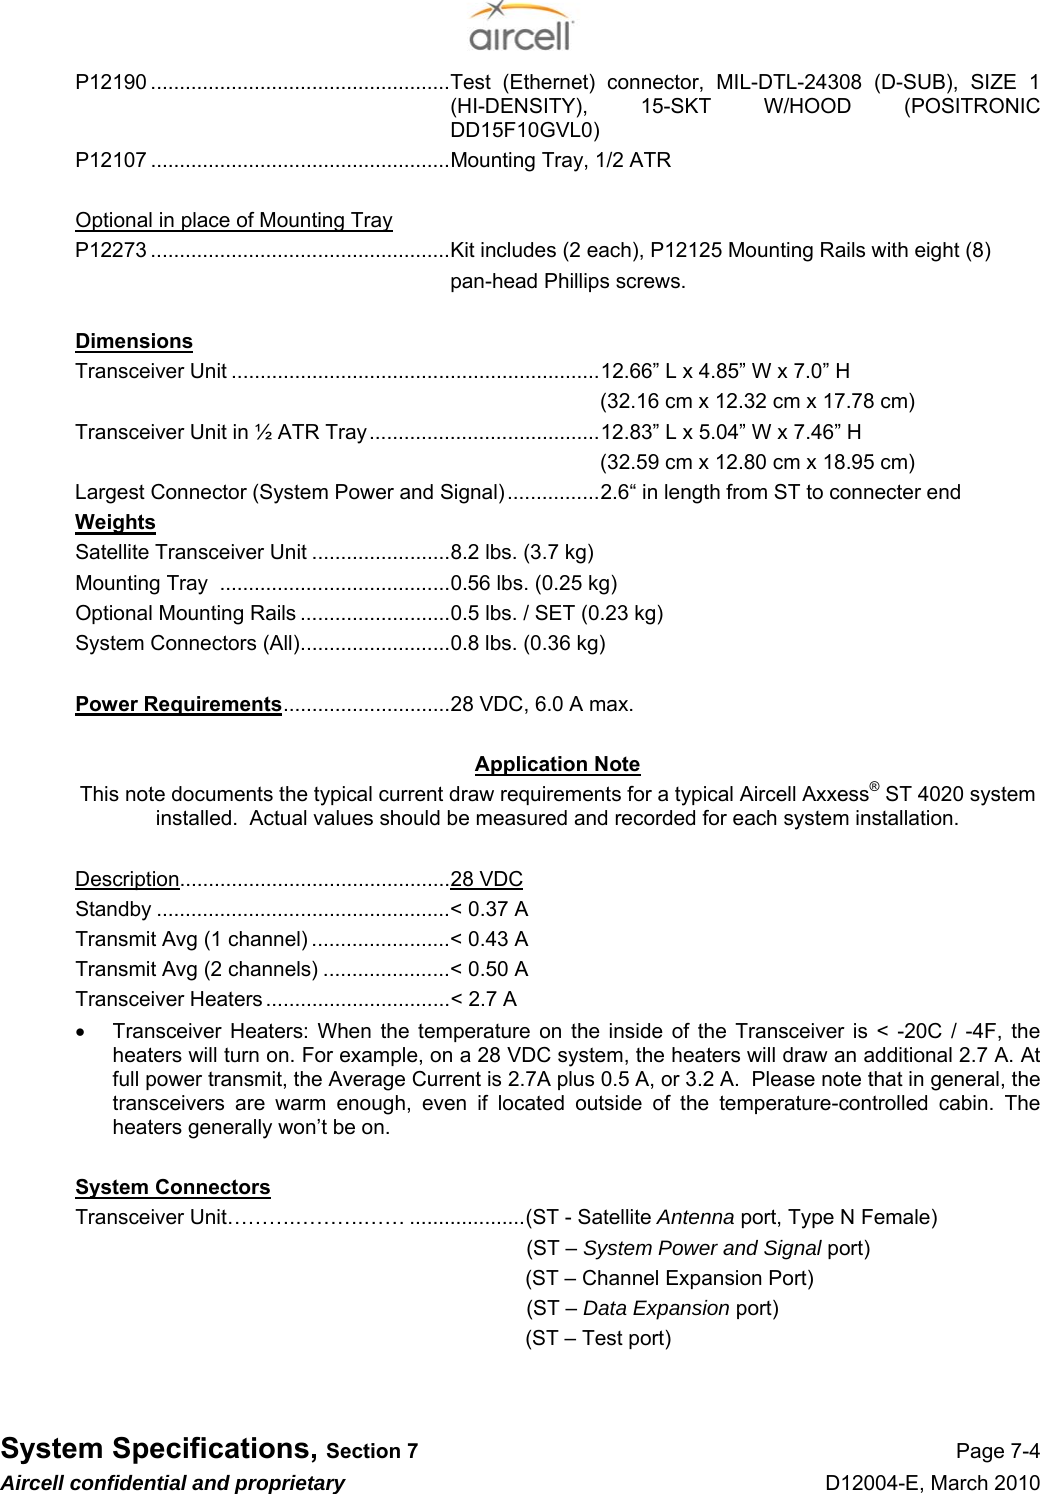  System Specifications, Section 7 Page 7-4 Aircell confidential and proprietary D12004-E, March 2010 P12190 ....................................................Test (Ethernet) connector, MIL-DTL-24308 (D-SUB), SIZE 1 (HI-DENSITY), 15-SKT W/HOOD (POSITRONIC DD15F10GVL0) P12107 ....................................................Mounting Tray, 1/2 ATR  Optional in place of Mounting Tray P12273 ....................................................Kit includes (2 each), P12125 Mounting Rails with eight (8)  pan-head Phillips screws.  Dimensions Transceiver Unit ................................................................12.66” L x 4.85” W x 7.0” H (32.16 cm x 12.32 cm x 17.78 cm) Transceiver Unit in ½ ATR Tray........................................12.83” L x 5.04” W x 7.46” H (32.59 cm x 12.80 cm x 18.95 cm) Largest Connector (System Power and Signal)................2.6“ in length from ST to connecter end Weights Satellite Transceiver Unit ........................8.2 lbs. (3.7 kg) Mounting Tray  ........................................0.56 lbs. (0.25 kg) Optional Mounting Rails ..........................0.5 lbs. / SET (0.23 kg) System Connectors (All)..........................0.8 lbs. (0.36 kg)  Power Requirements.............................28 VDC, 6.0 A max.  Application Note This note documents the typical current draw requirements for a typical Aircell Axxess® ST 4020 system installed.  Actual values should be measured and recorded for each system installation.  Description...............................................28 VDC Standby ...................................................&lt; 0.37 A Transmit Avg (1 channel) ........................&lt; 0.43 A Transmit Avg (2 channels) ......................&lt; 0.50 A Transceiver Heaters ................................&lt; 2.7 A   •  Transceiver Heaters: When the temperature on the inside of the Transceiver is &lt; -20C / -4F, the heaters will turn on. For example, on a 28 VDC system, the heaters will draw an additional 2.7 A. At full power transmit, the Average Current is 2.7A plus 0.5 A, or 3.2 A.  Please note that in general, the transceivers are warm enough, even if located outside of the temperature-controlled cabin. The heaters generally won’t be on.  System Connectors Transceiver Unit……….……….…… ....................(ST - Satellite Antenna port, Type N Female) (ST – System Power and Signal port) (ST – Channel Expansion Port) (ST – Data Expansion port) (ST – Test port)   